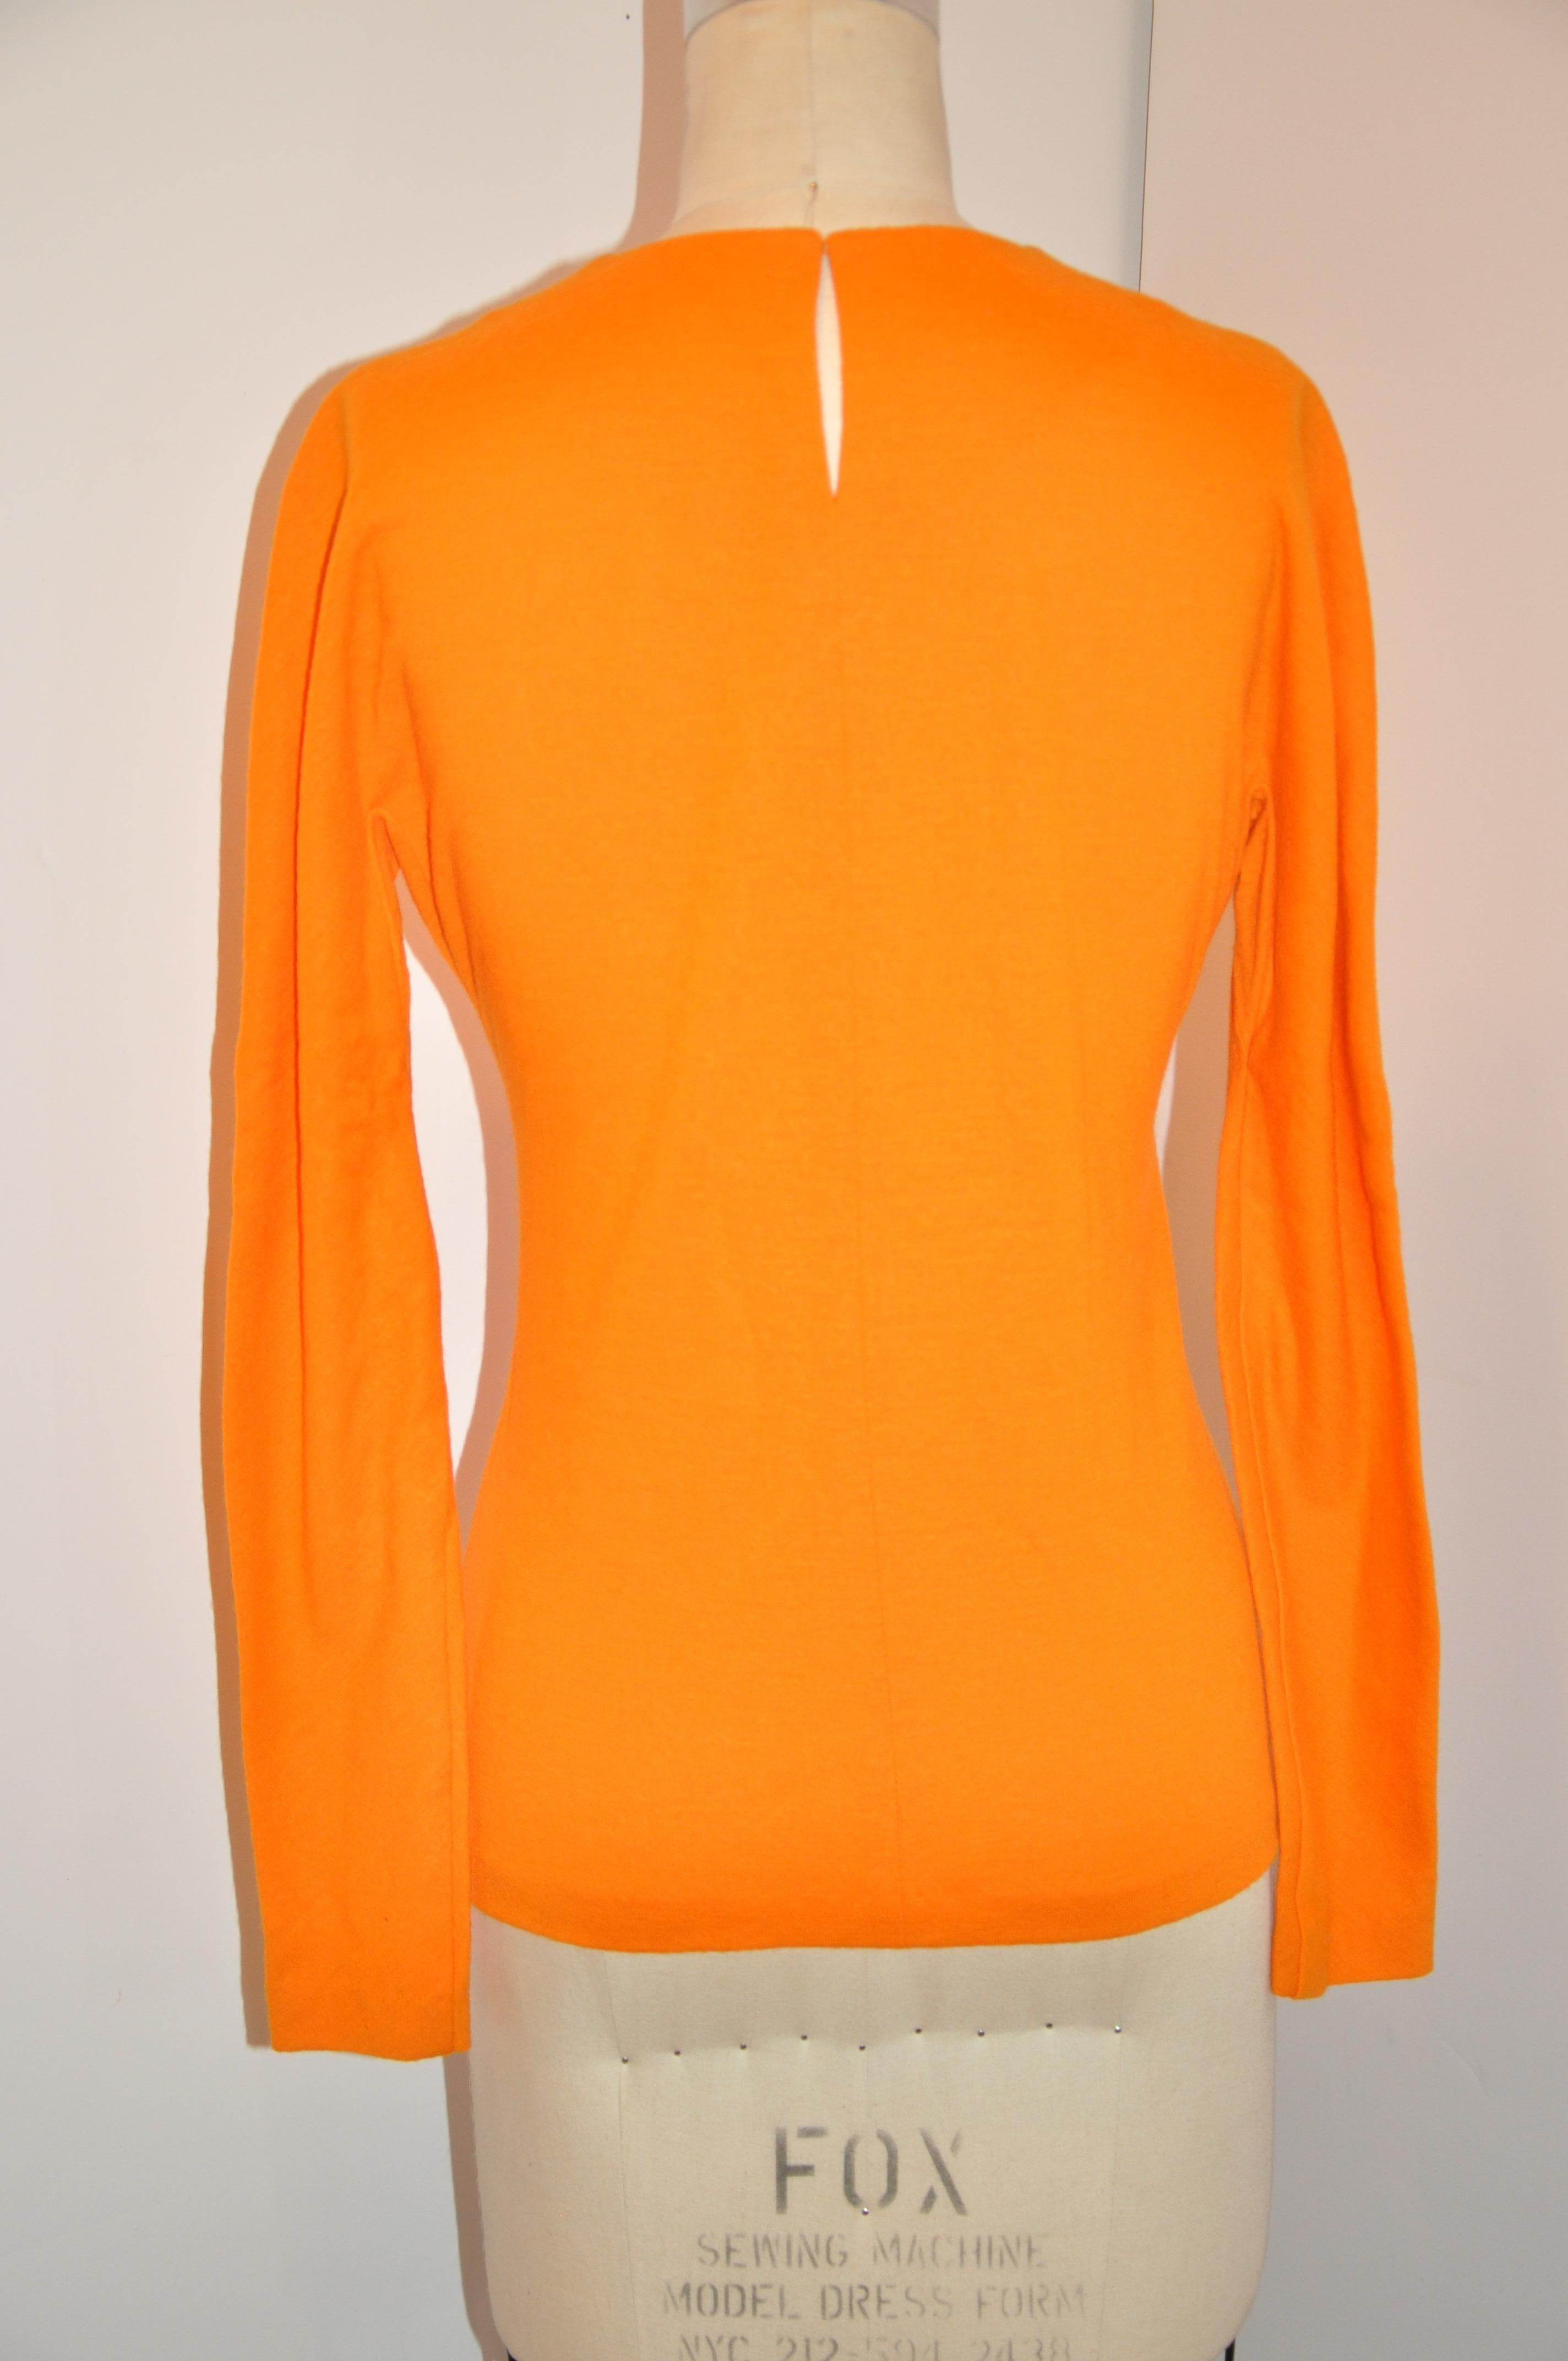 Women's or Men's Rare Stephen Sprouse Warm Tangerine Wool Jersey Pullover Top For Sale